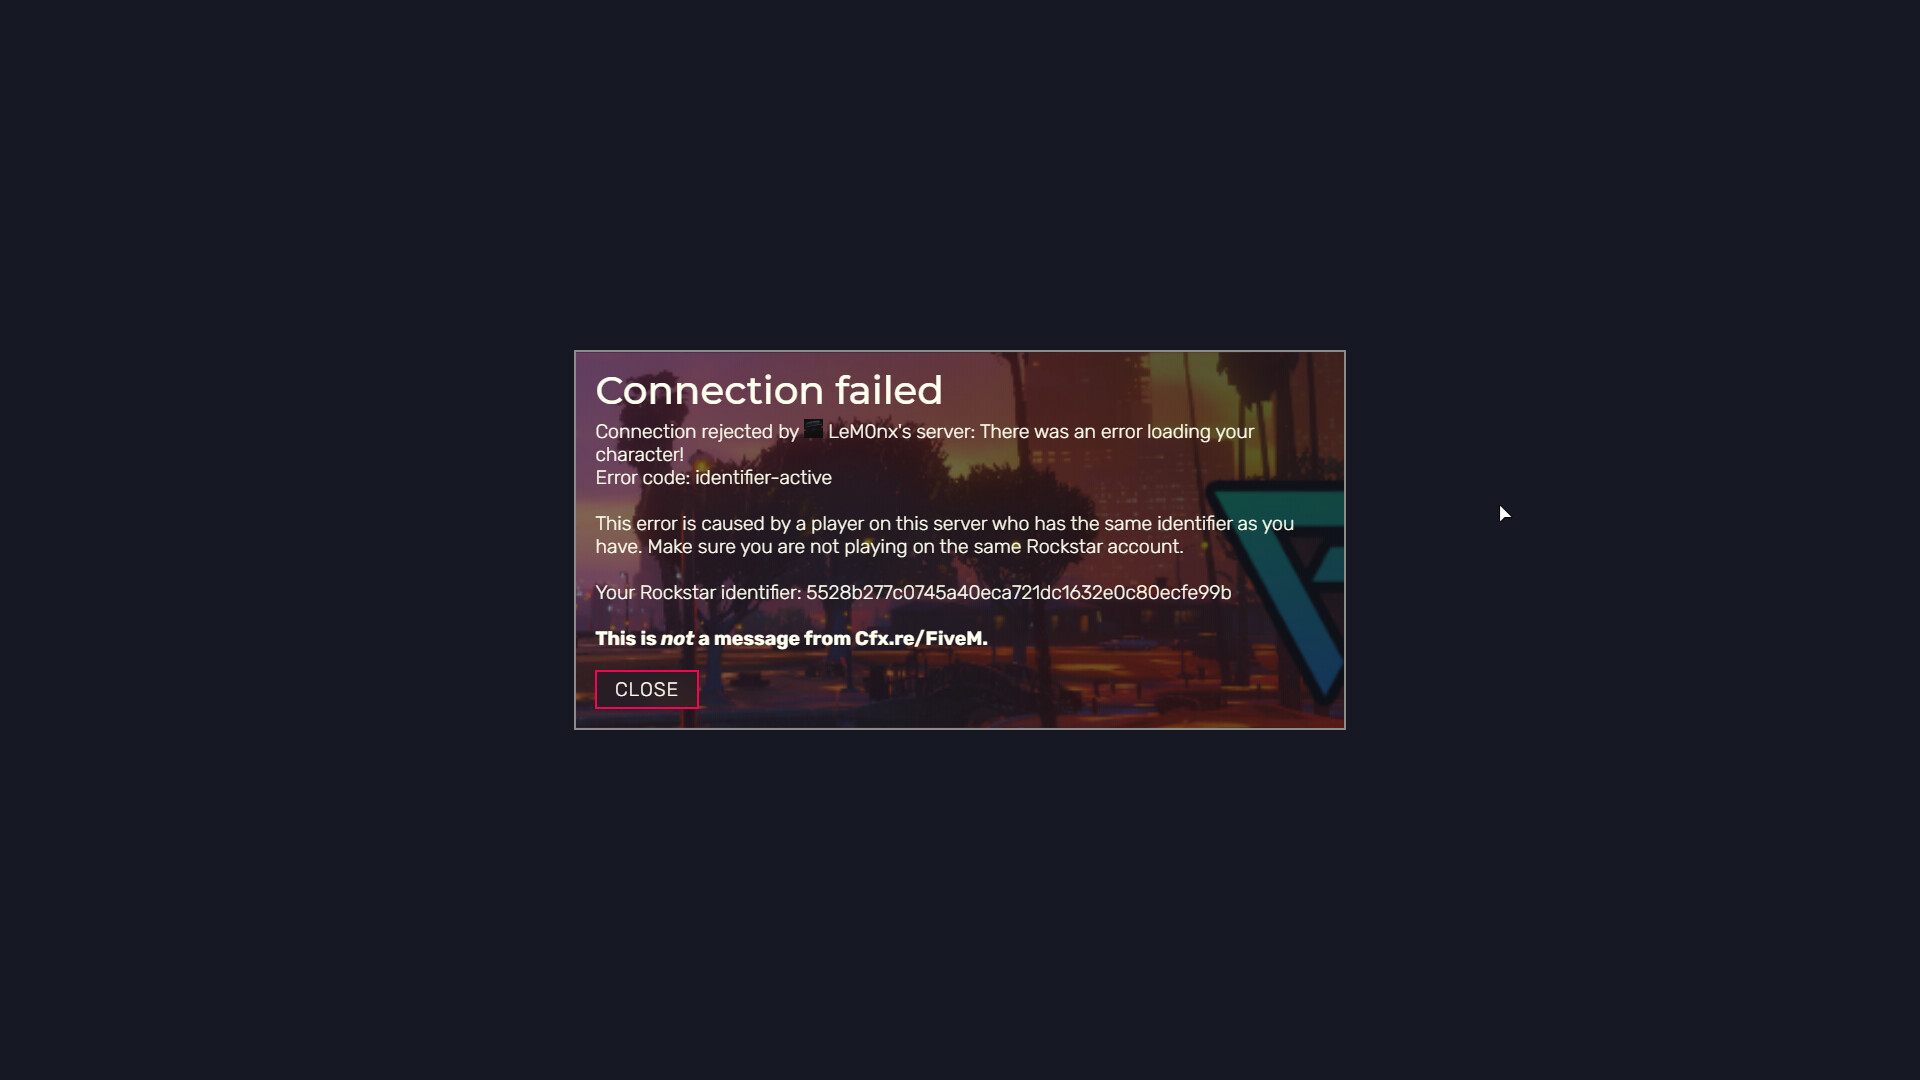 Ошибка connect failed. Connection failed ошибка. Connection failed ошибка Mozilla. White list Error FIVEM. Connection rejected.